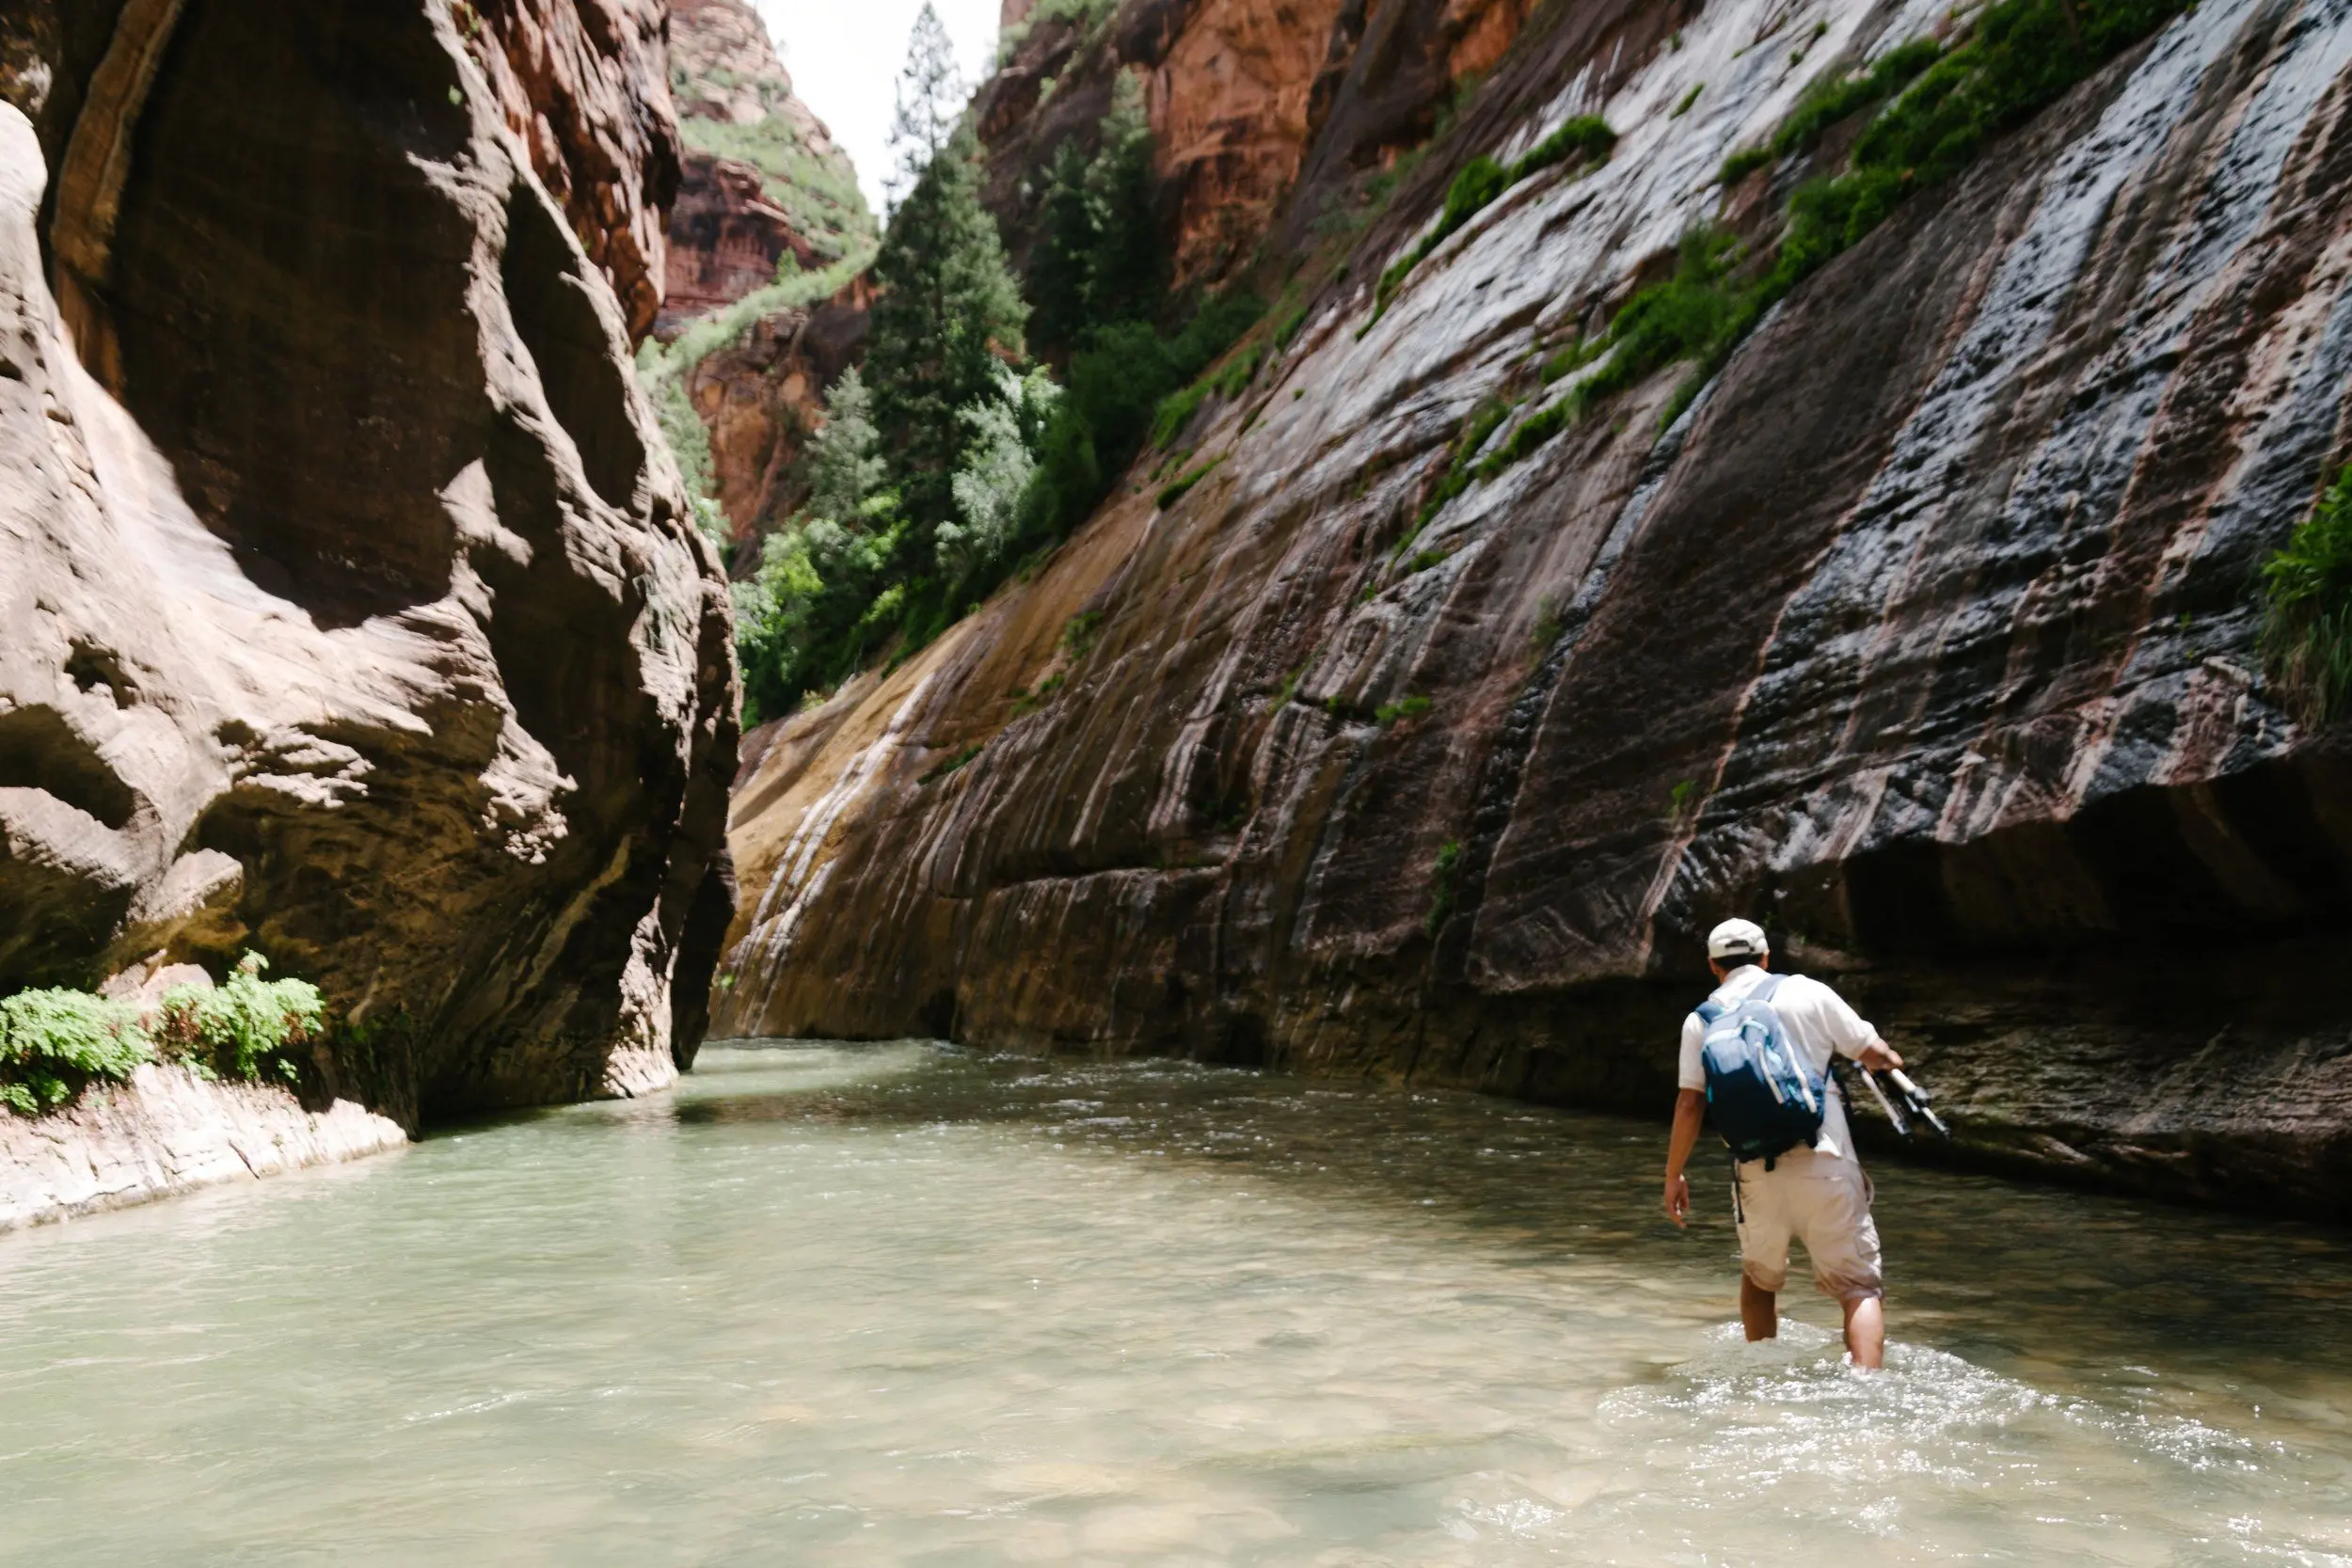 A man with a blue backpack hand-carrying a tripod wades through waters of the Zion Narrows bordered by wet cliffs.